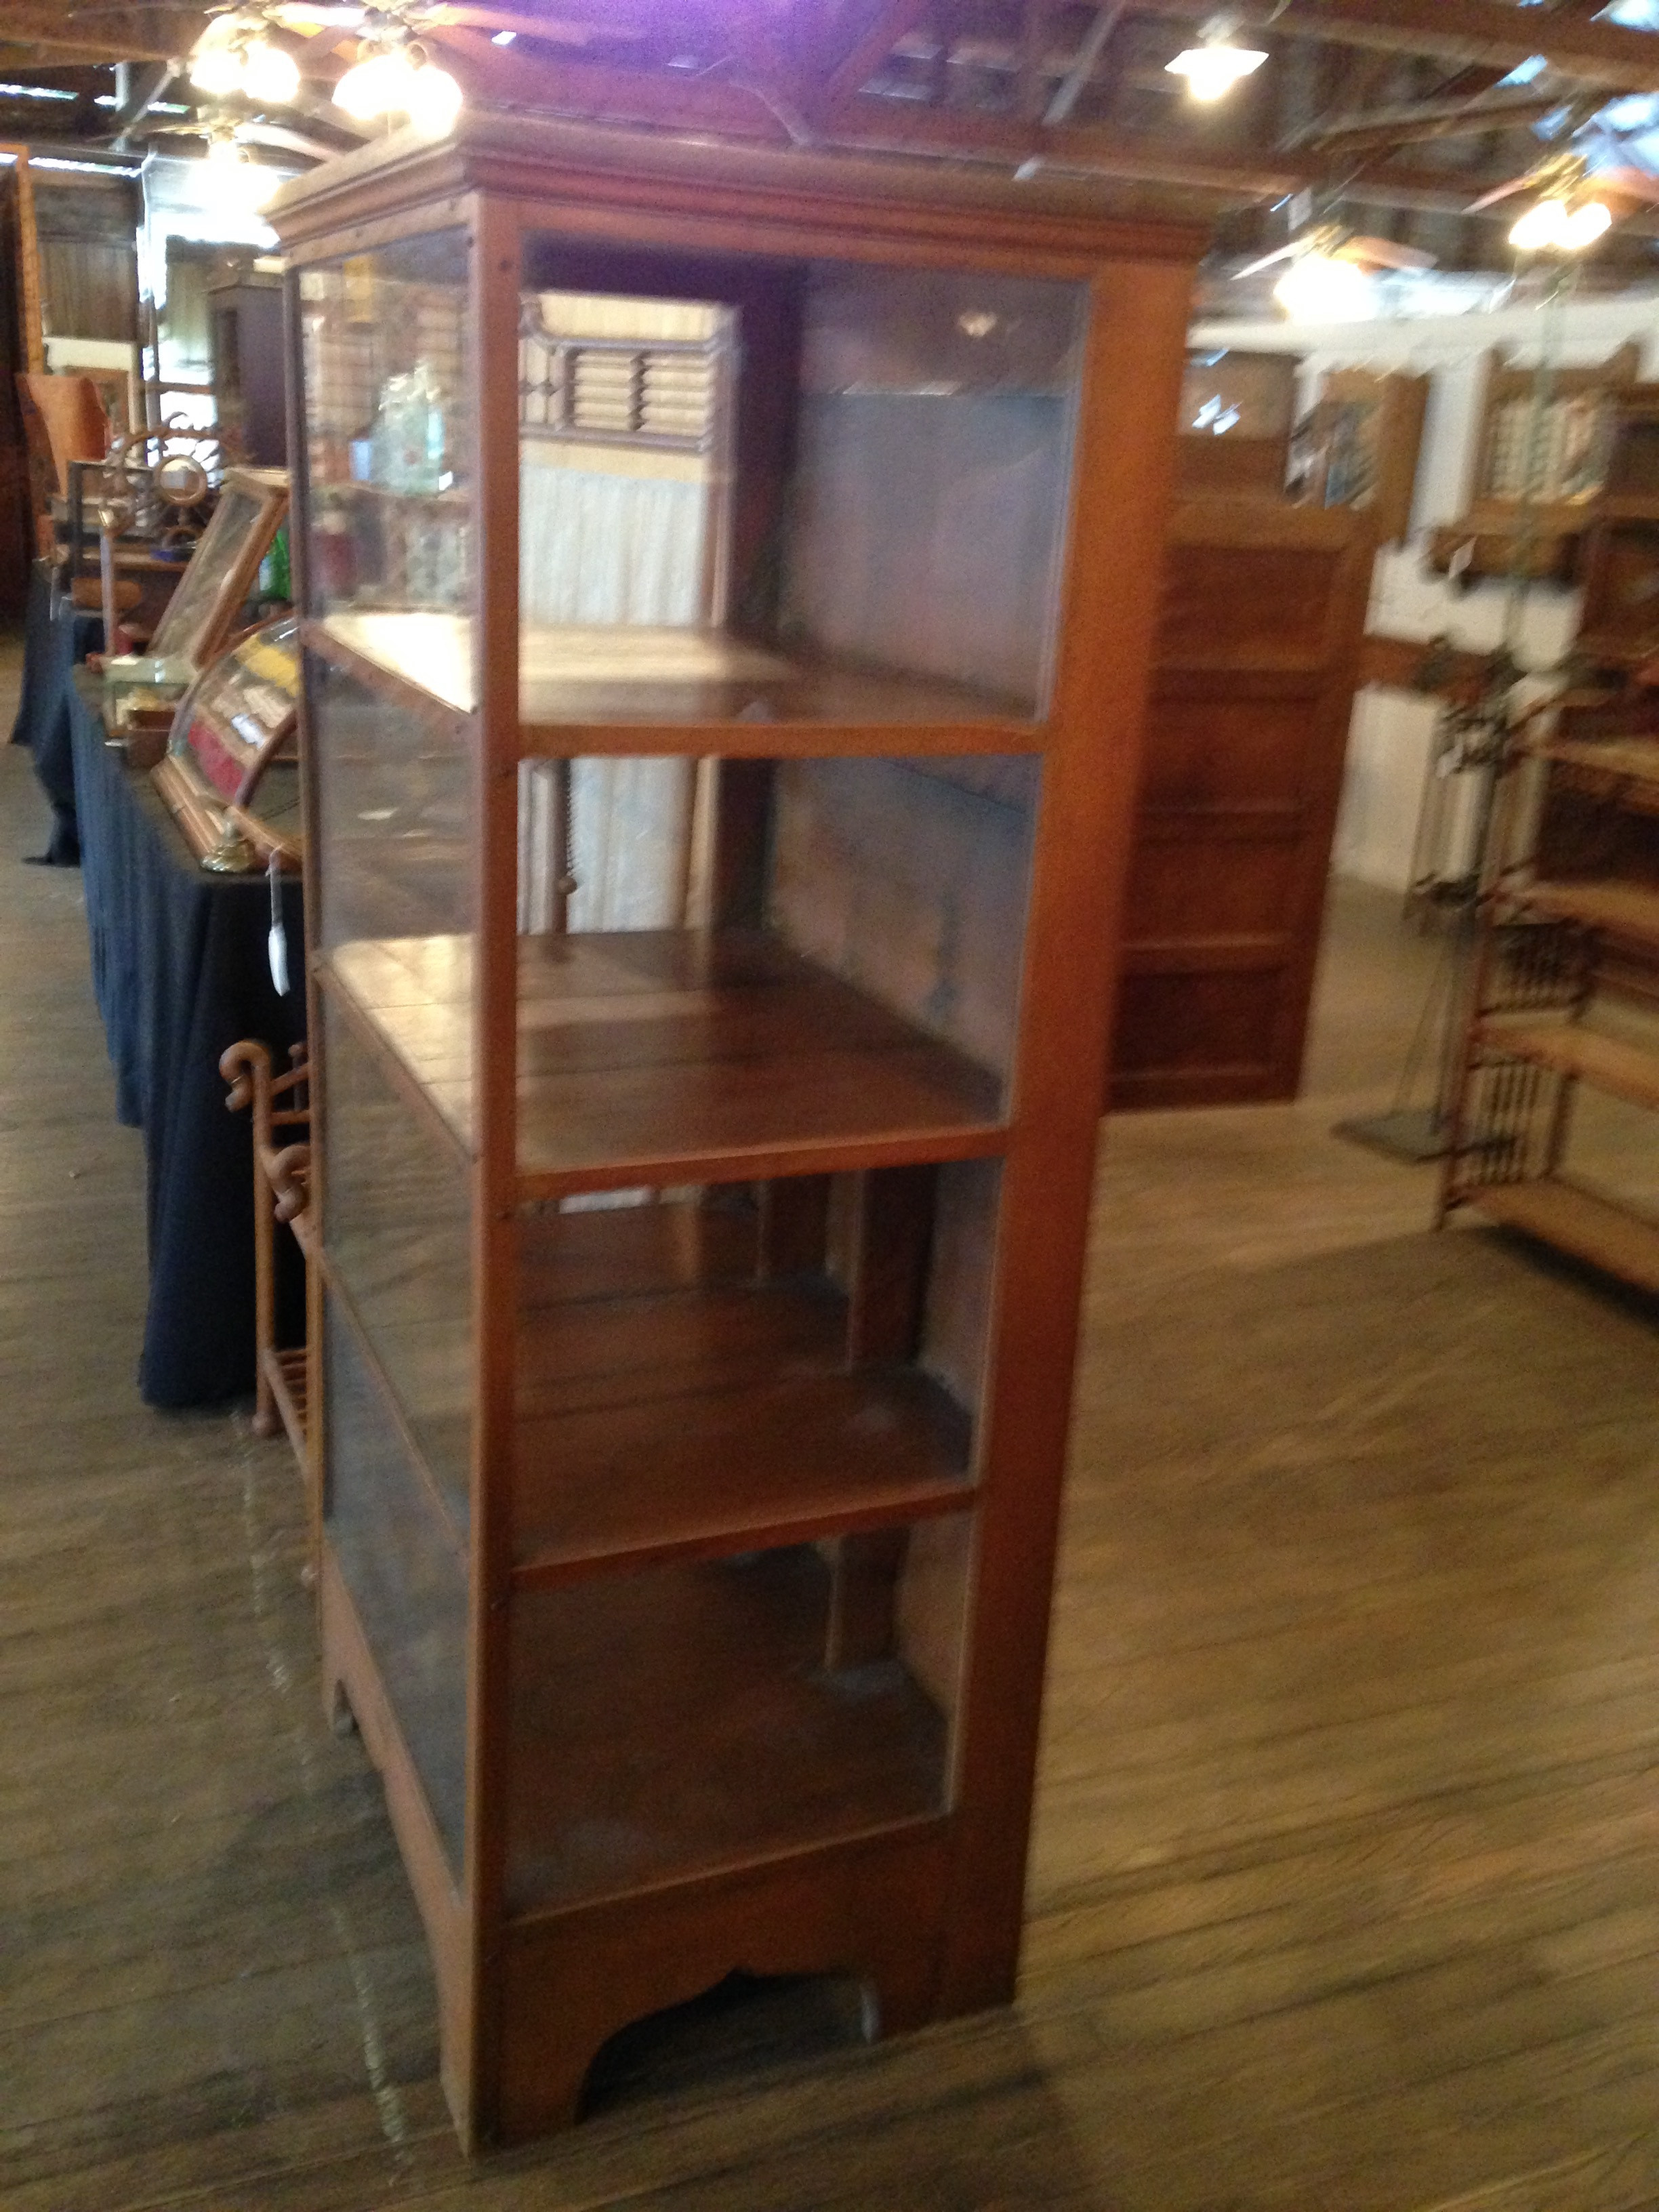 20 Wonderful Hardwood Flooring Display Racks 2024 free download hardwood flooring display racks of oak bakers showcase intended for oak baker showcase item wh10237 circa 1910 dimensions 20x 28x 60 tall condition good condition brass label on front o d ro